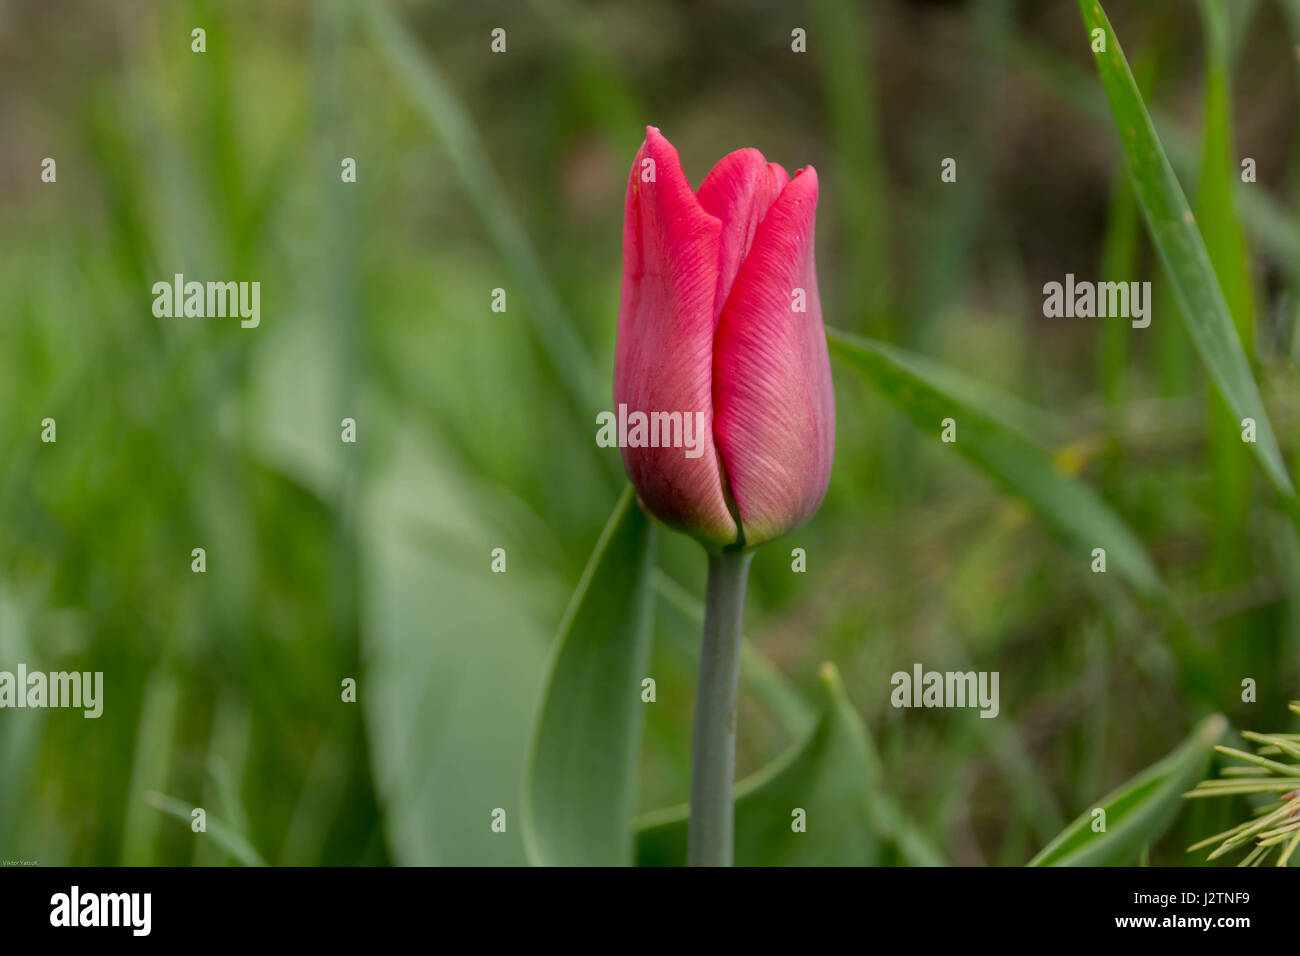 Red tulip on the center of the frame. Tulip on a background of green grass. Stock Photo